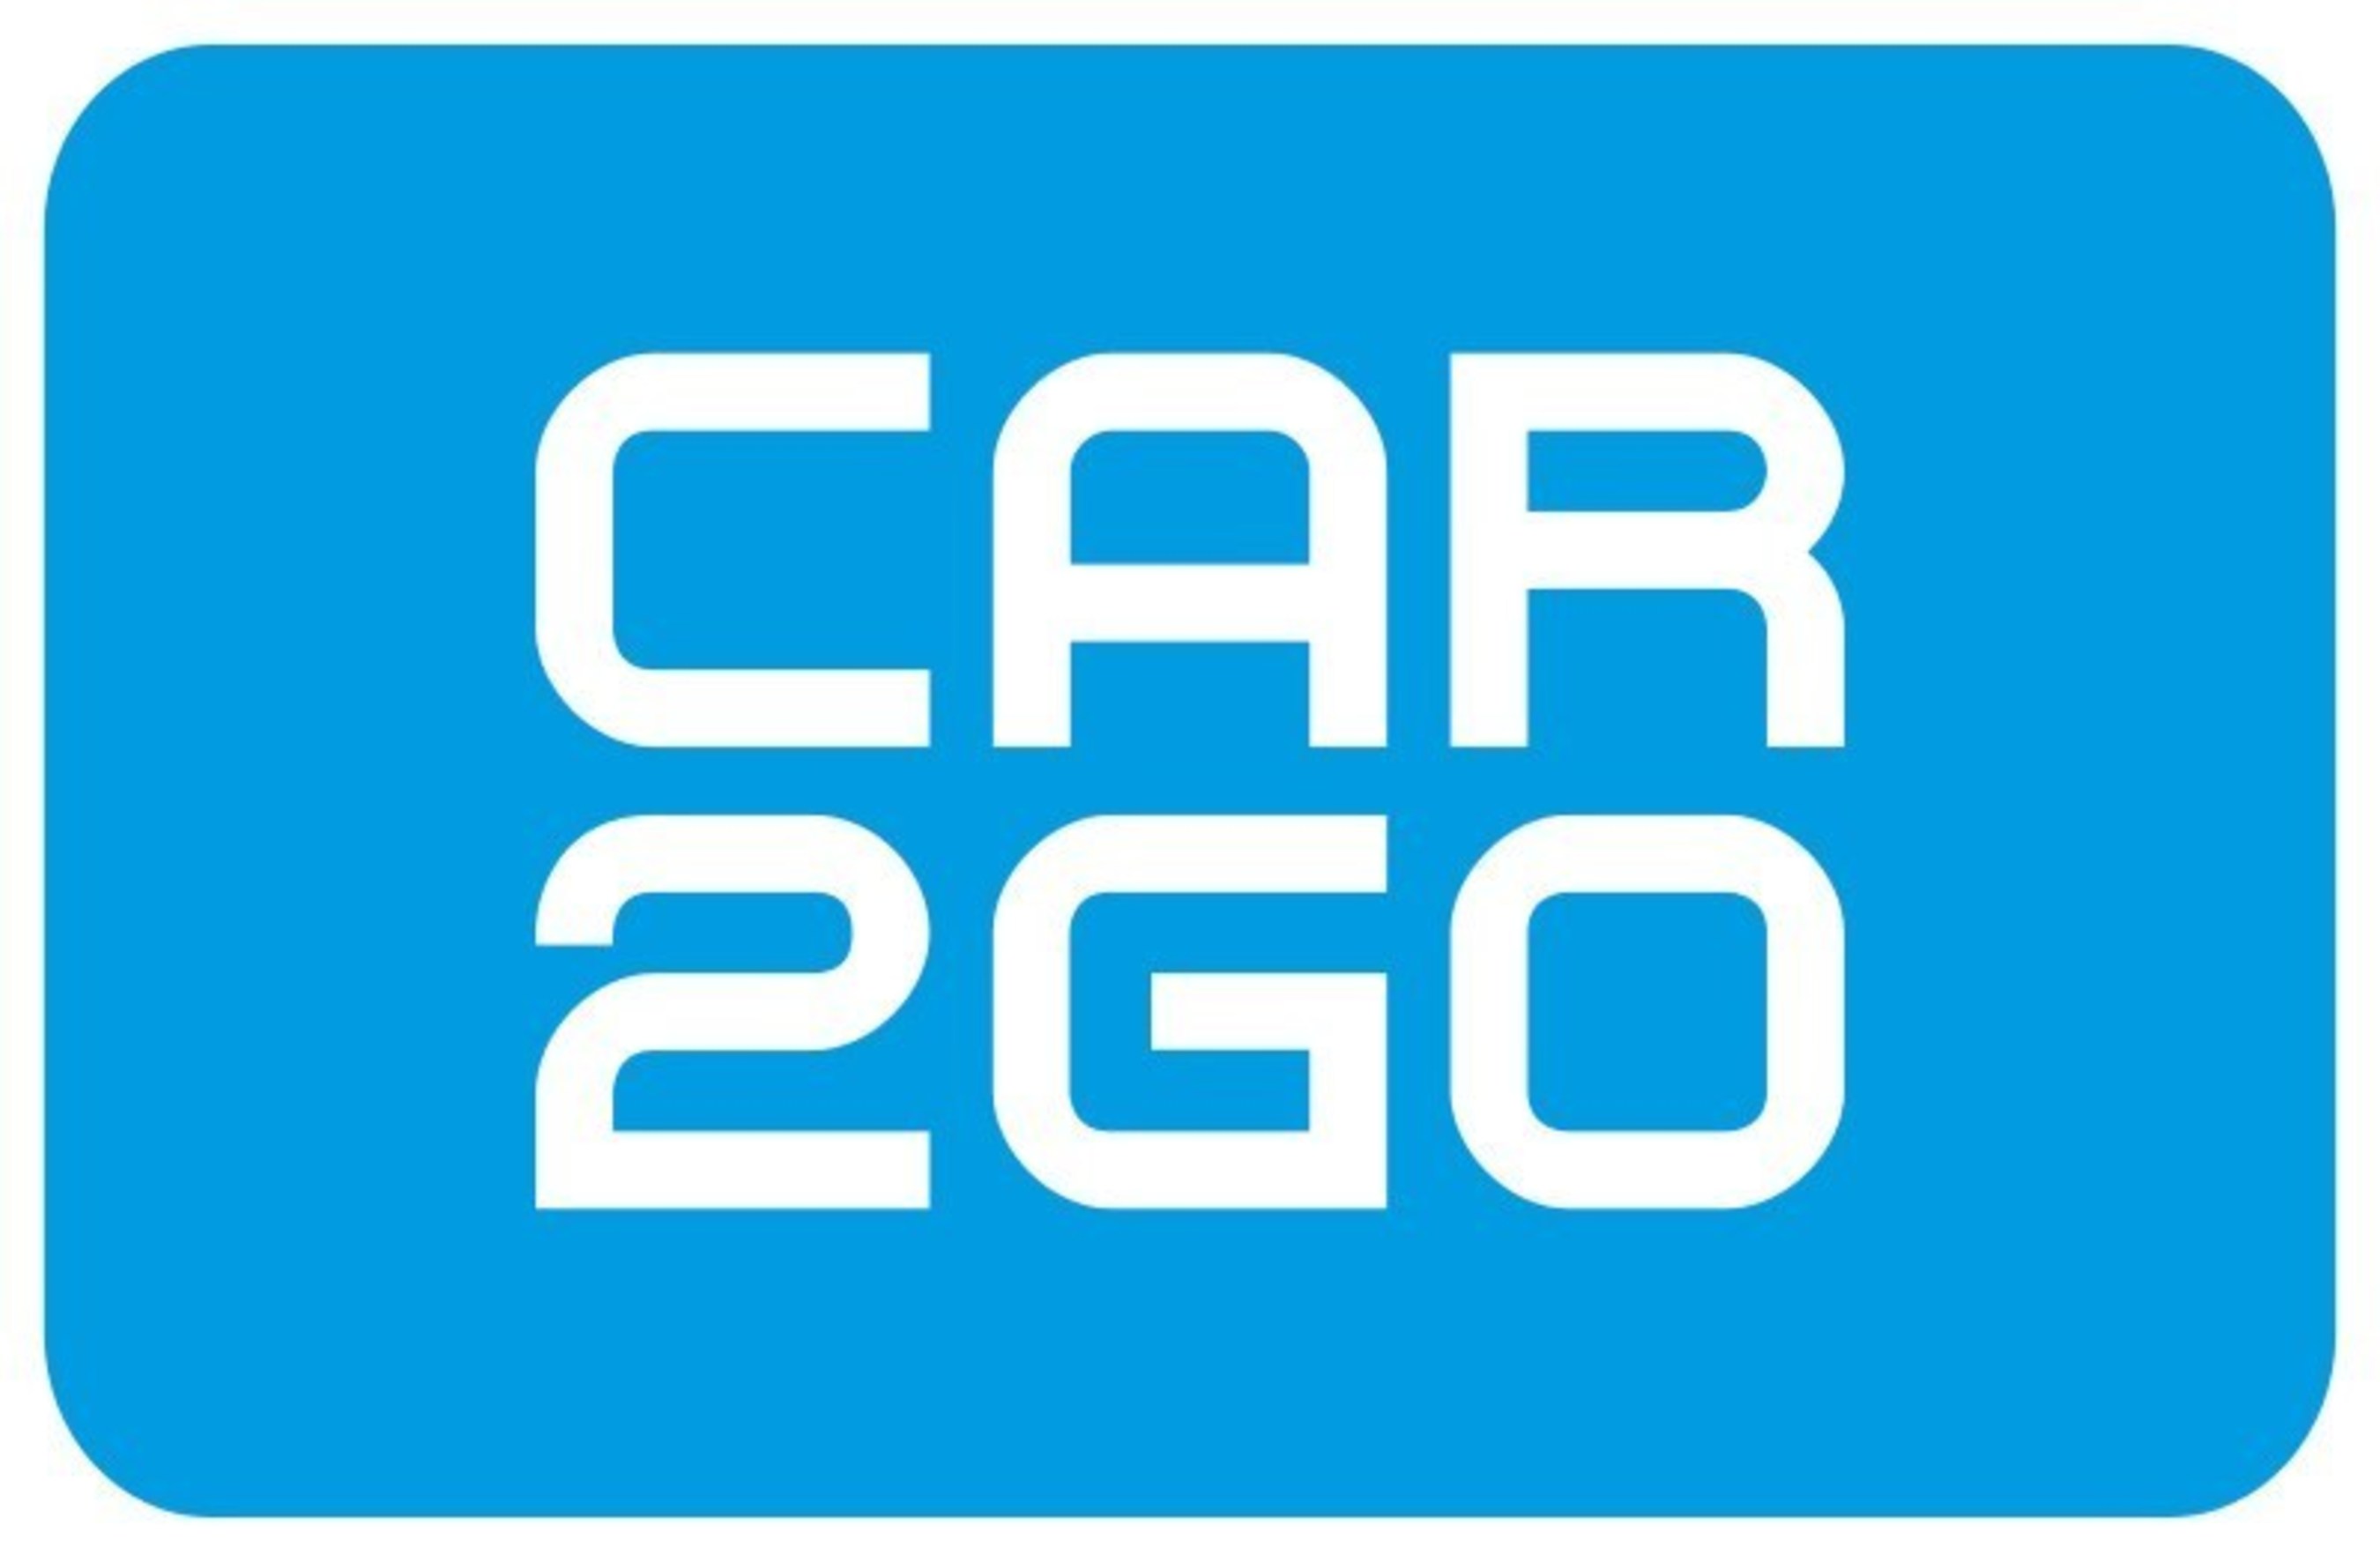 car2go Reaches 1,000,000 Members, Marking Its Spot As The Largest Carsharing Company In The World